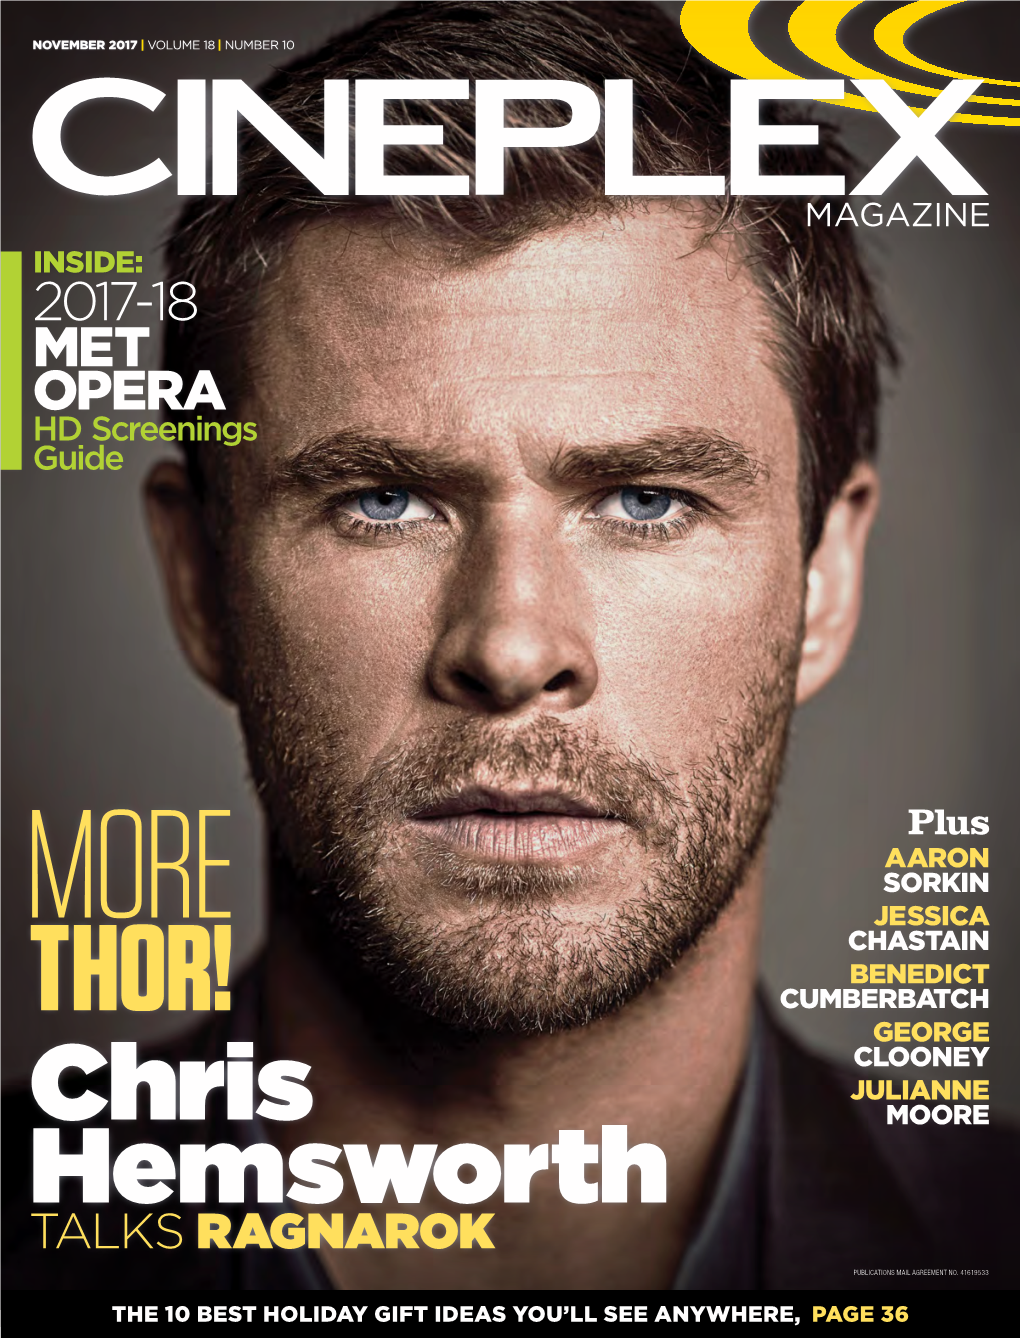 Chris Hemsworth Reveals That He’D Become So Bored Playing Marvel Superhero Thor He Felt He Was “Wearing Handcuffs.”